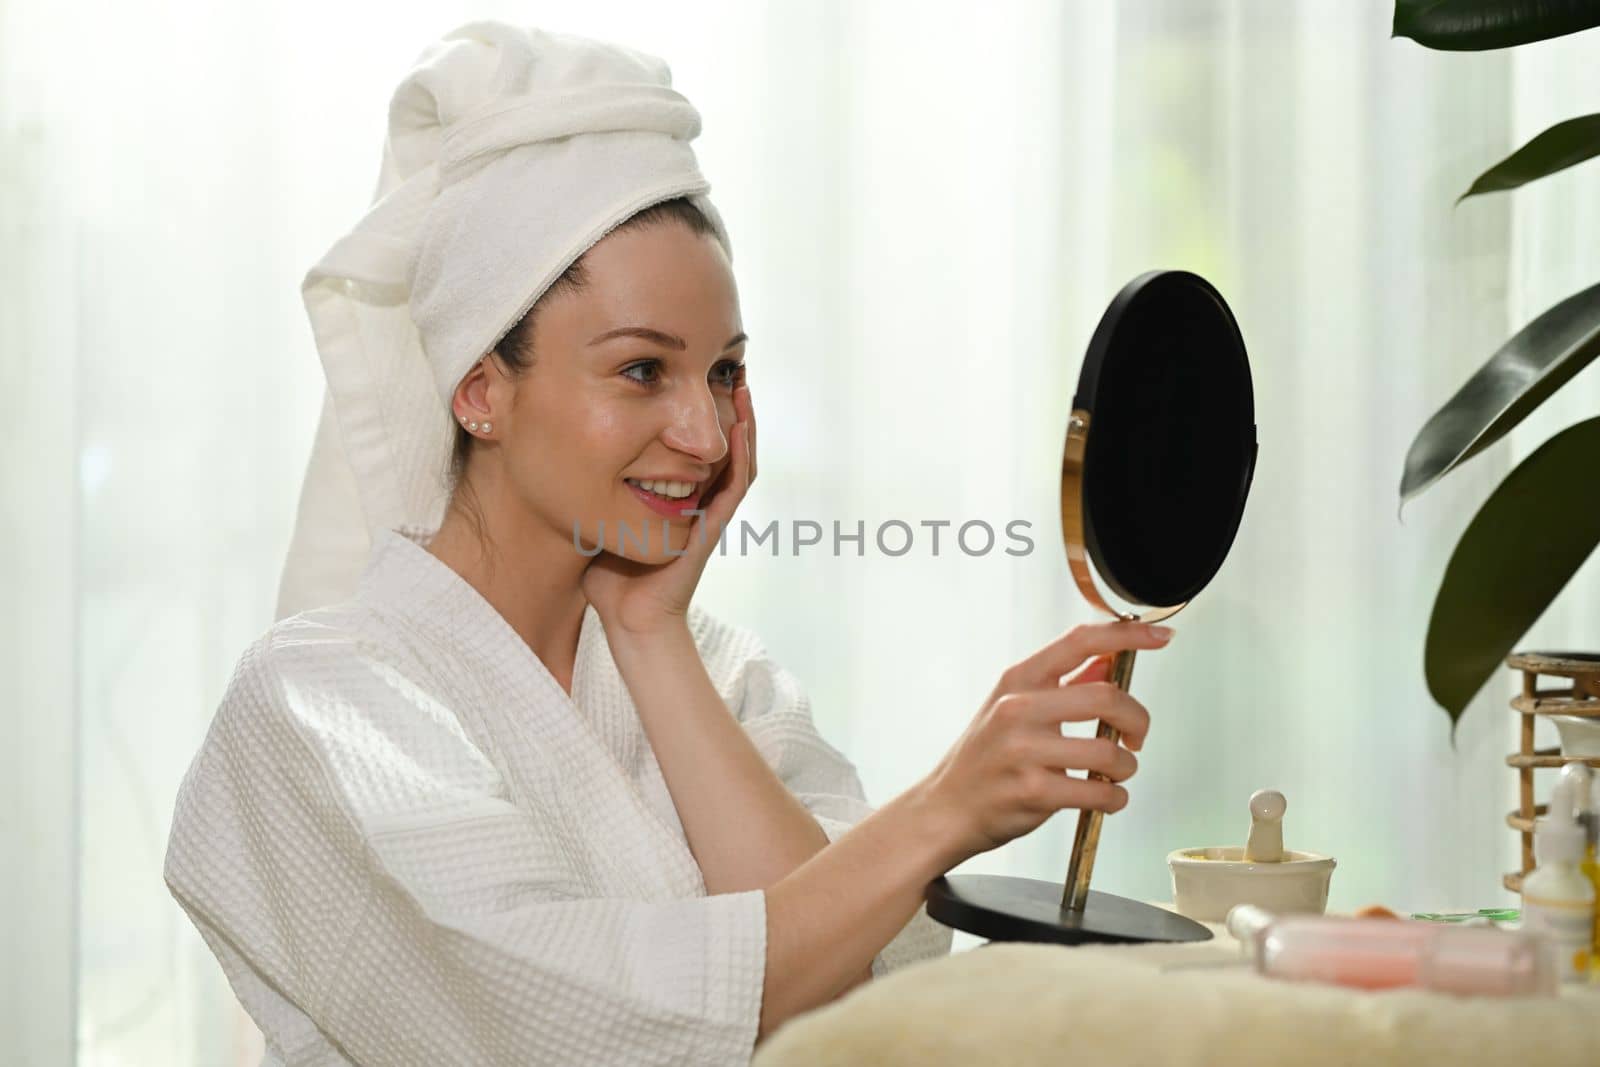 Smiling millennial woman in bathrobe standing front of mirror and making daily beauty routine at home.